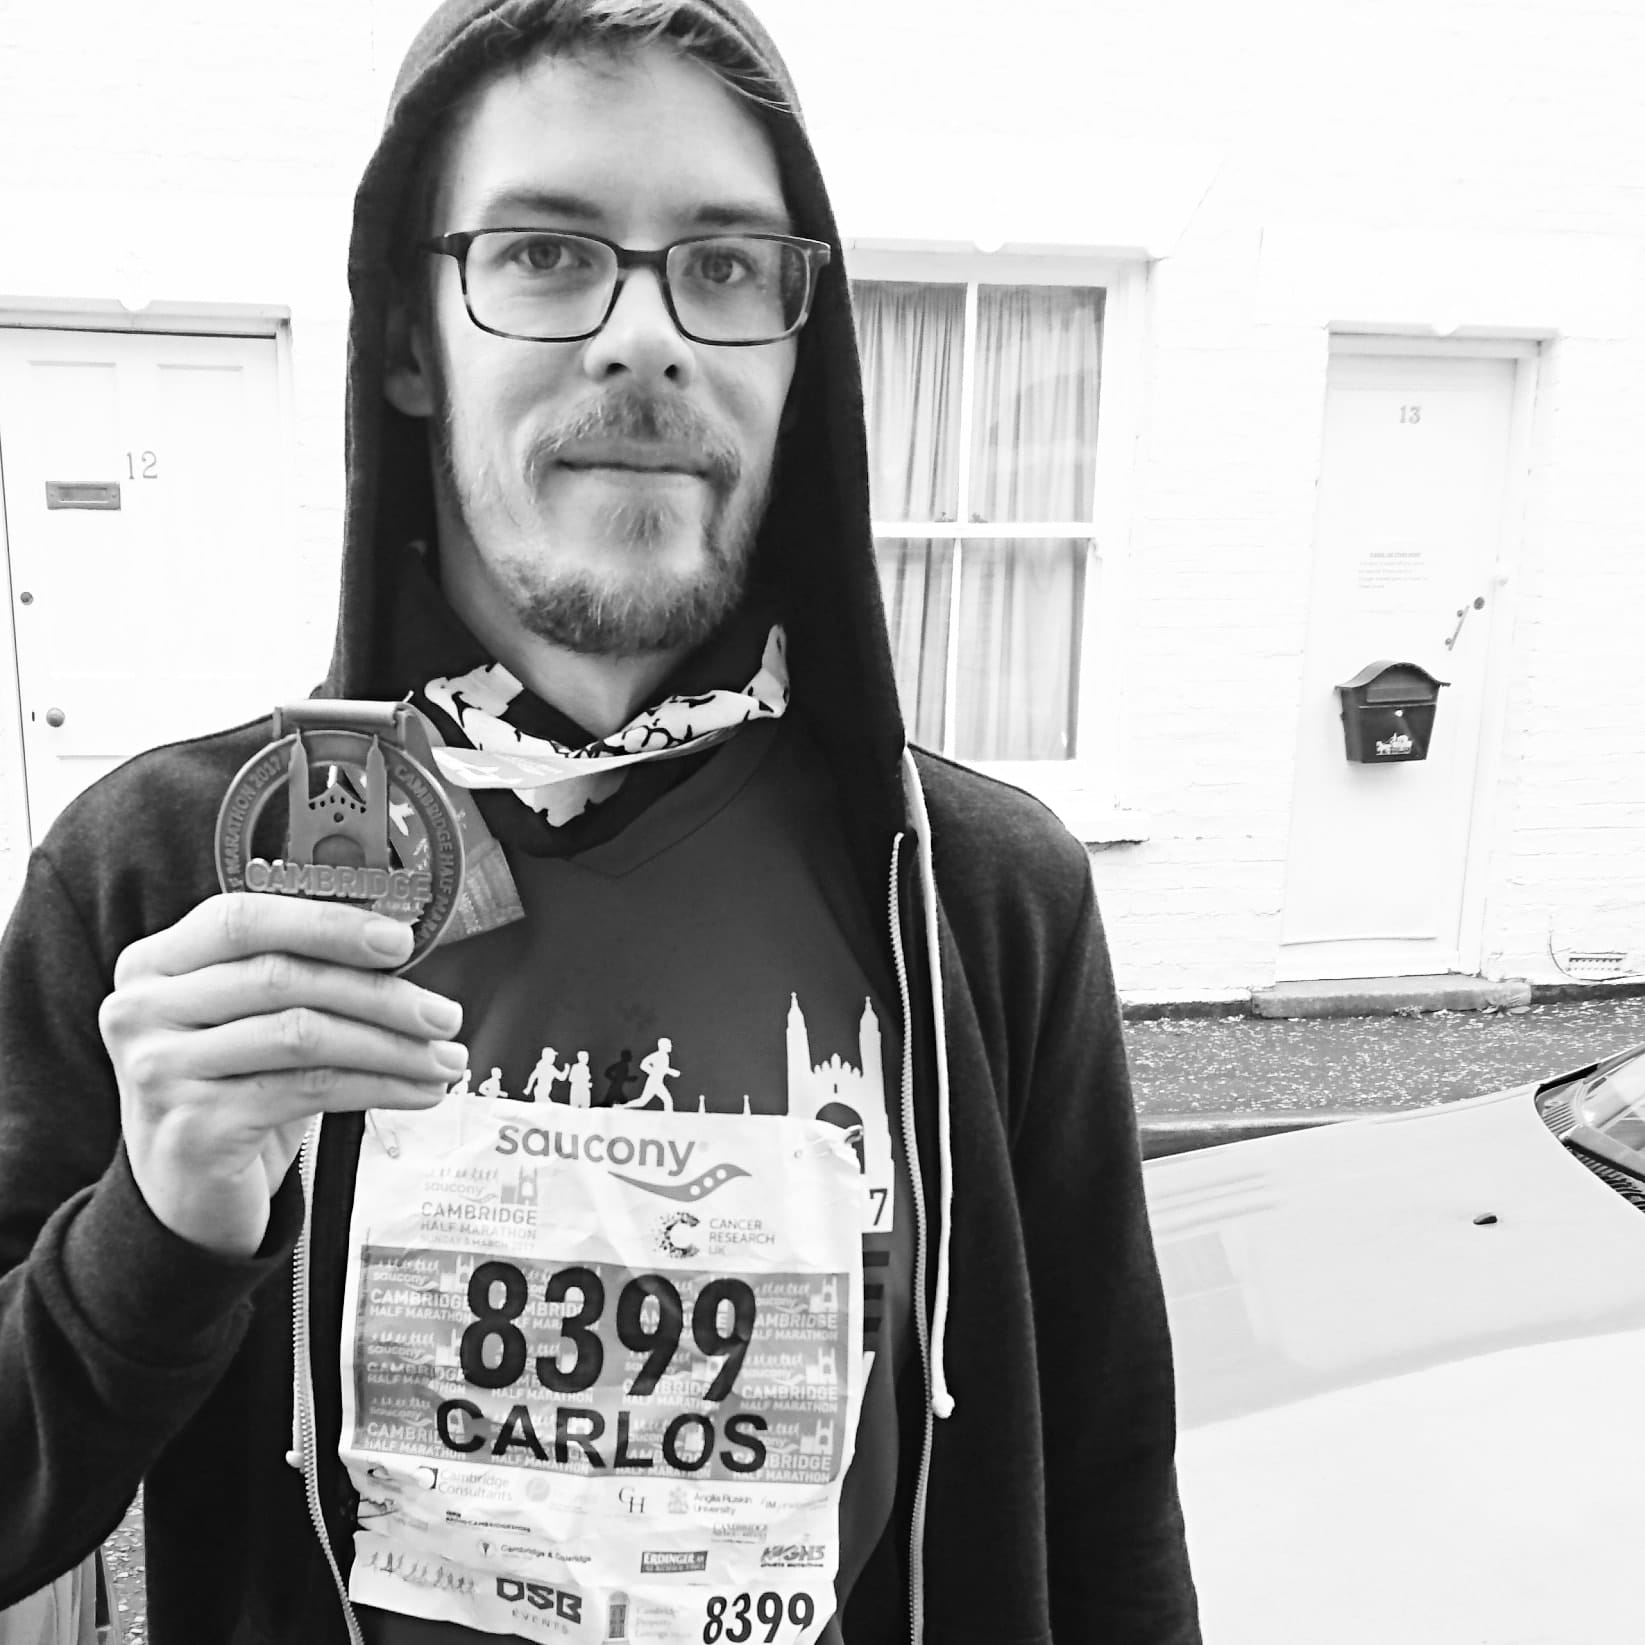 Carlos Eriksson posing with the medal from completing the Cambridge Half 2017.